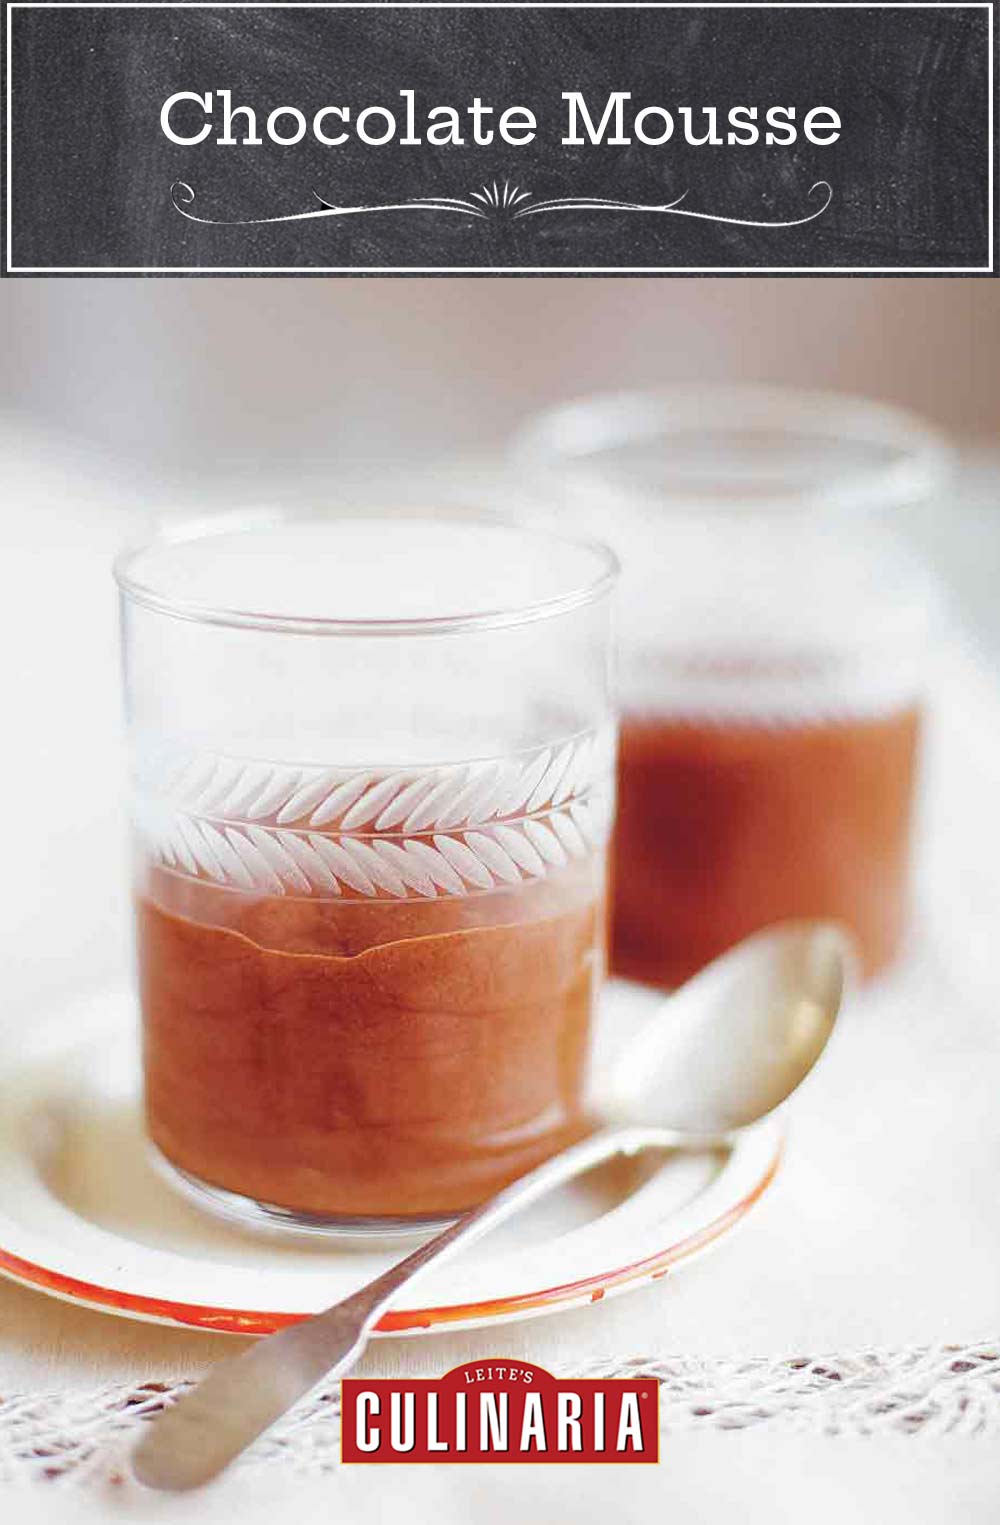 Two individual servings of chocolate mouse in glass tumblers served on a small plate with a silver spoon resting beside.